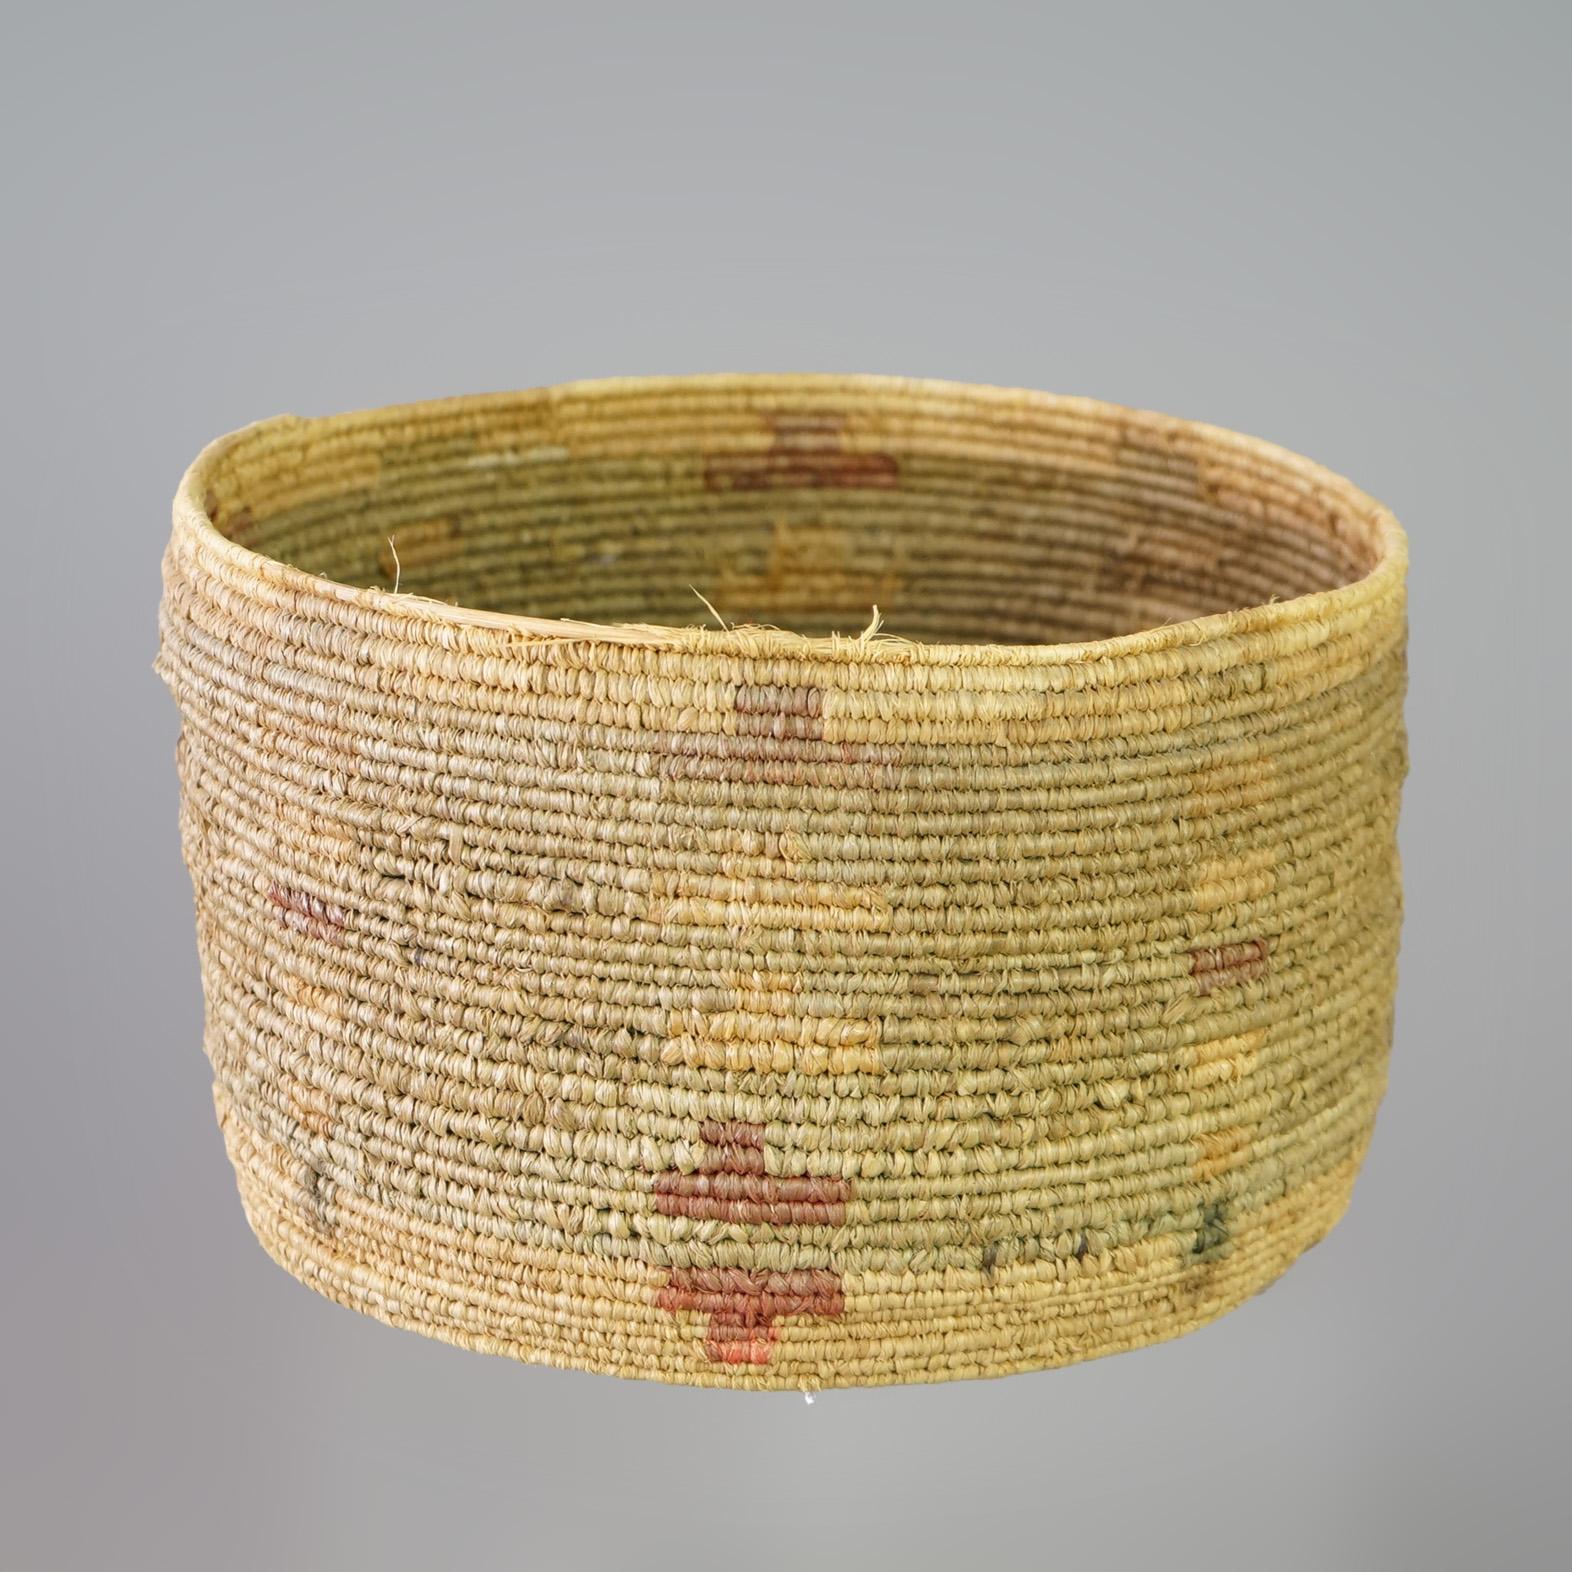 Reed Antique Southwest Native American Navajo Pima Woven Polychrome Basket Circa 1920 For Sale